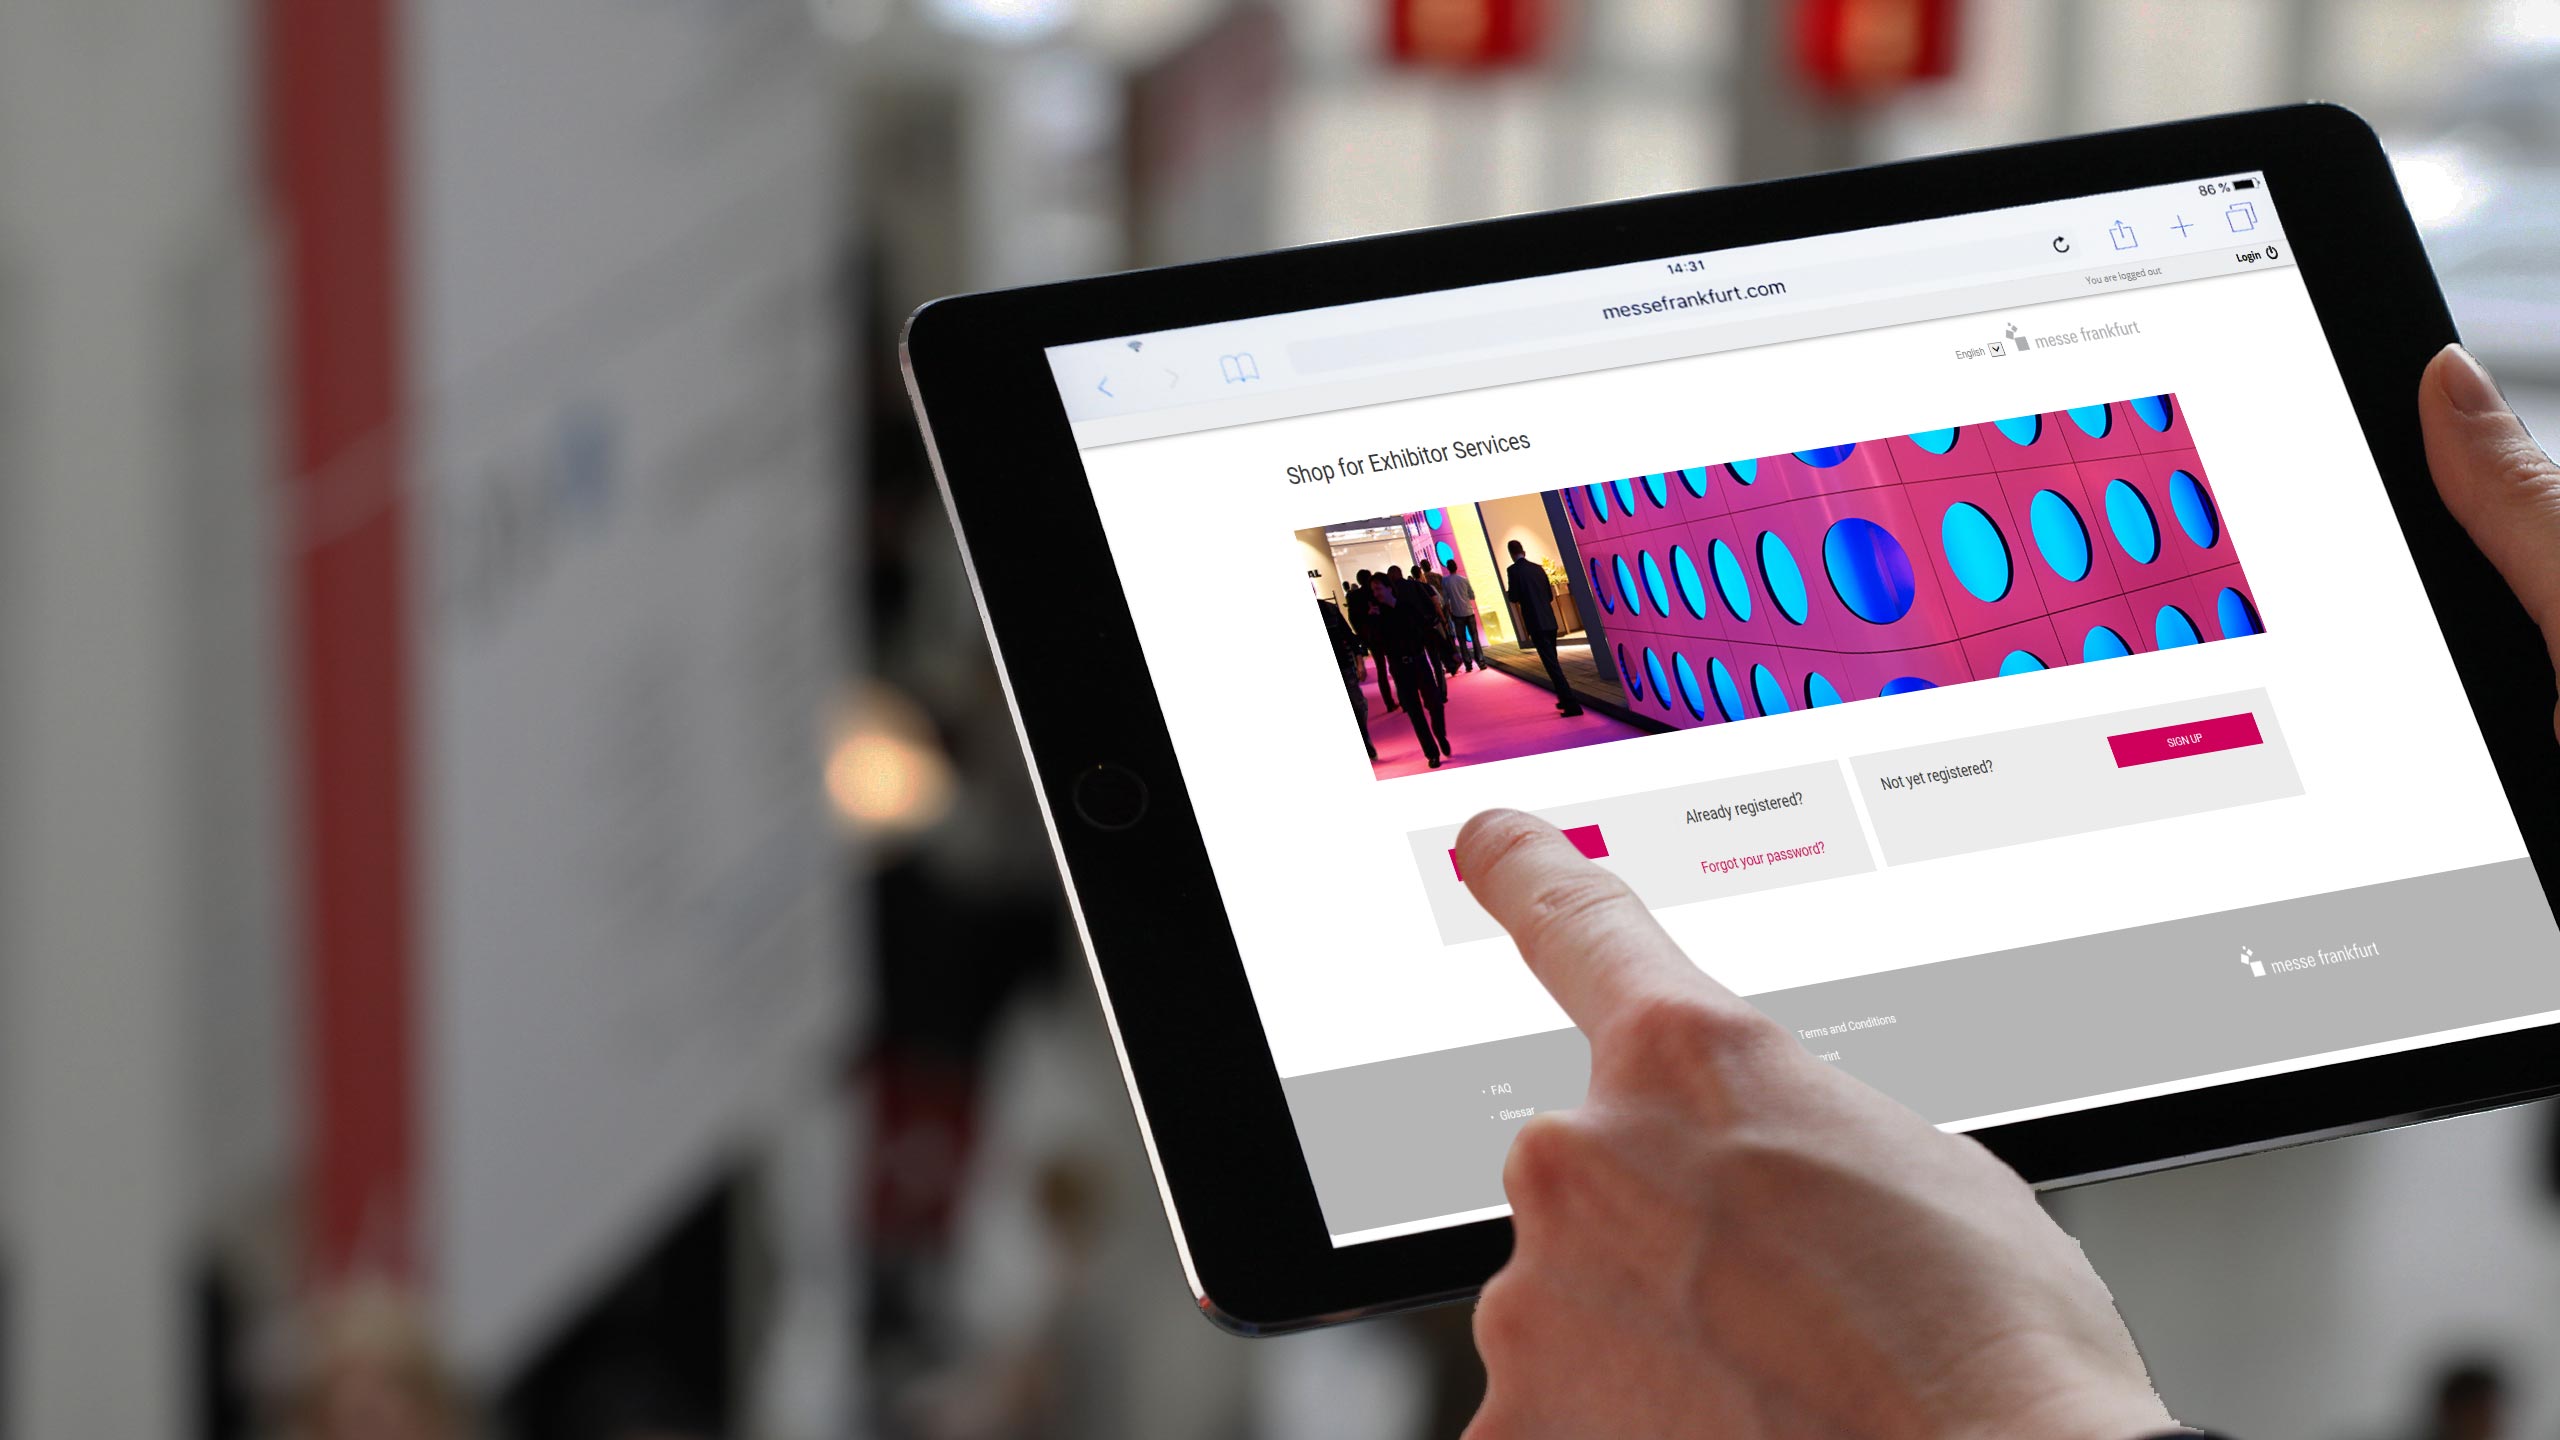 Shop for Exhibitor Services on an iPad